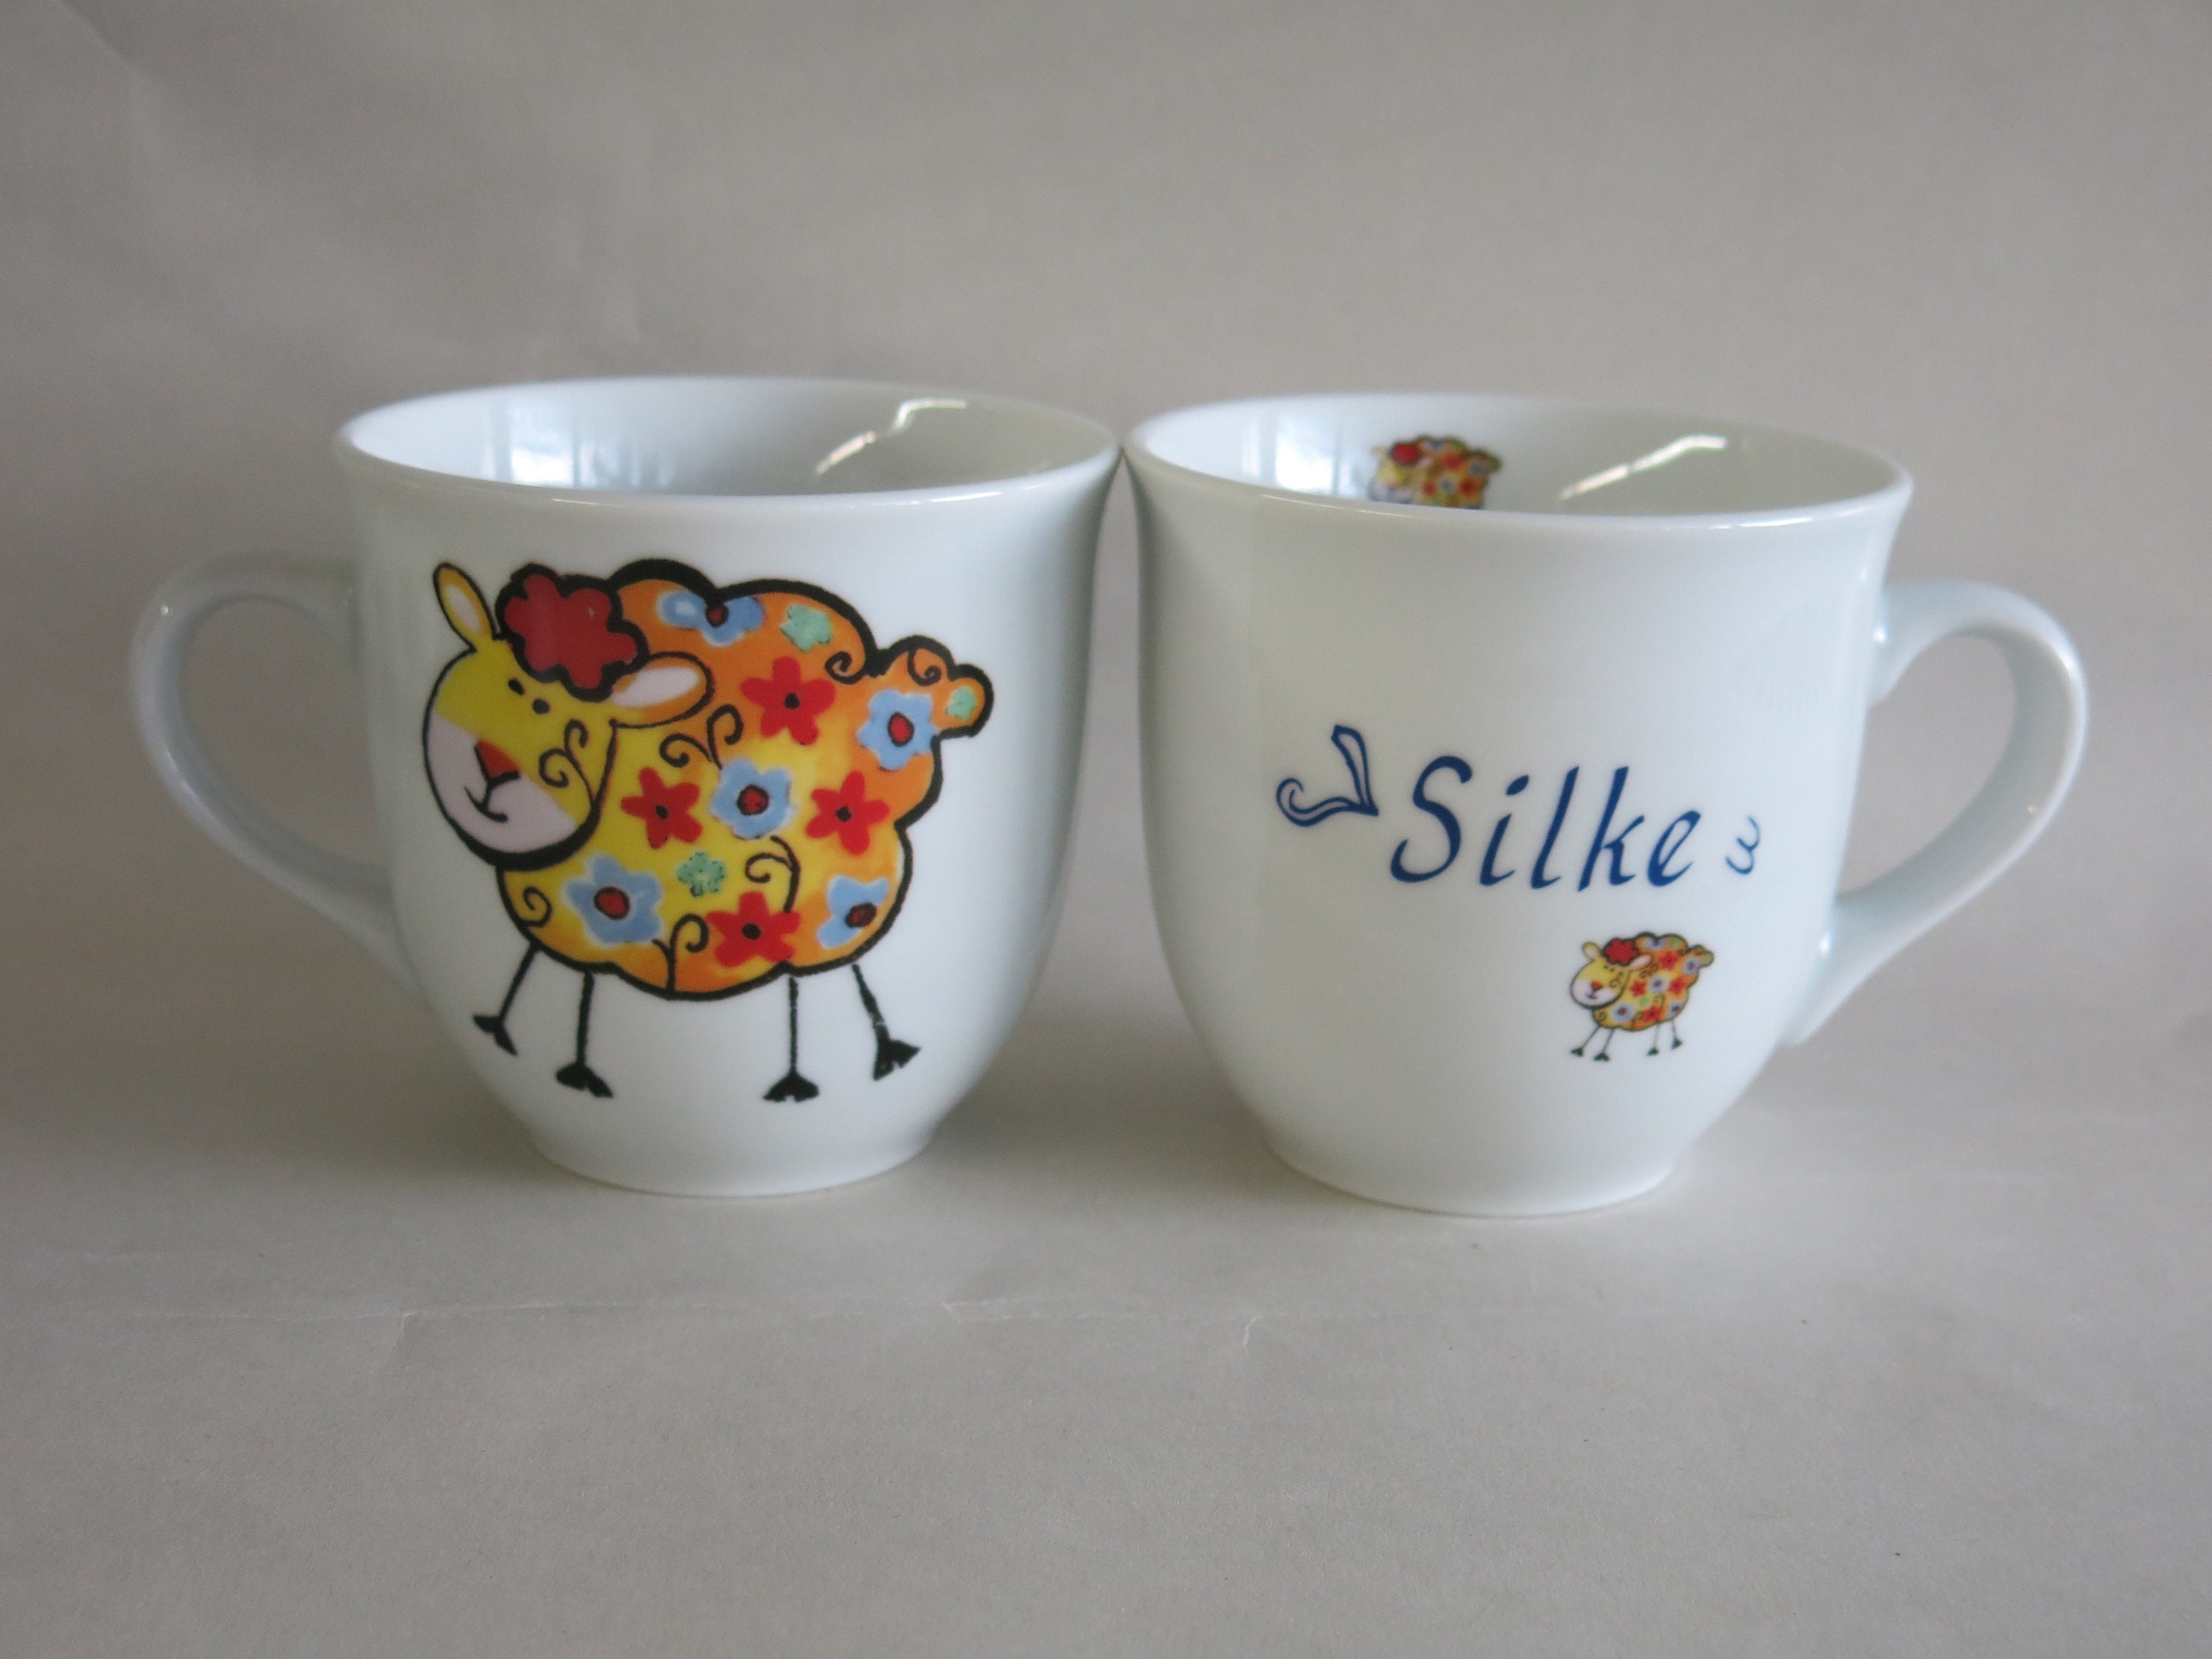 Large Name Cups With Colorful Sweden Sheep. Power Their With Cups. Sheep Fur, 3 on - Flowers Etsy in in Colors Names With Flower Personalized